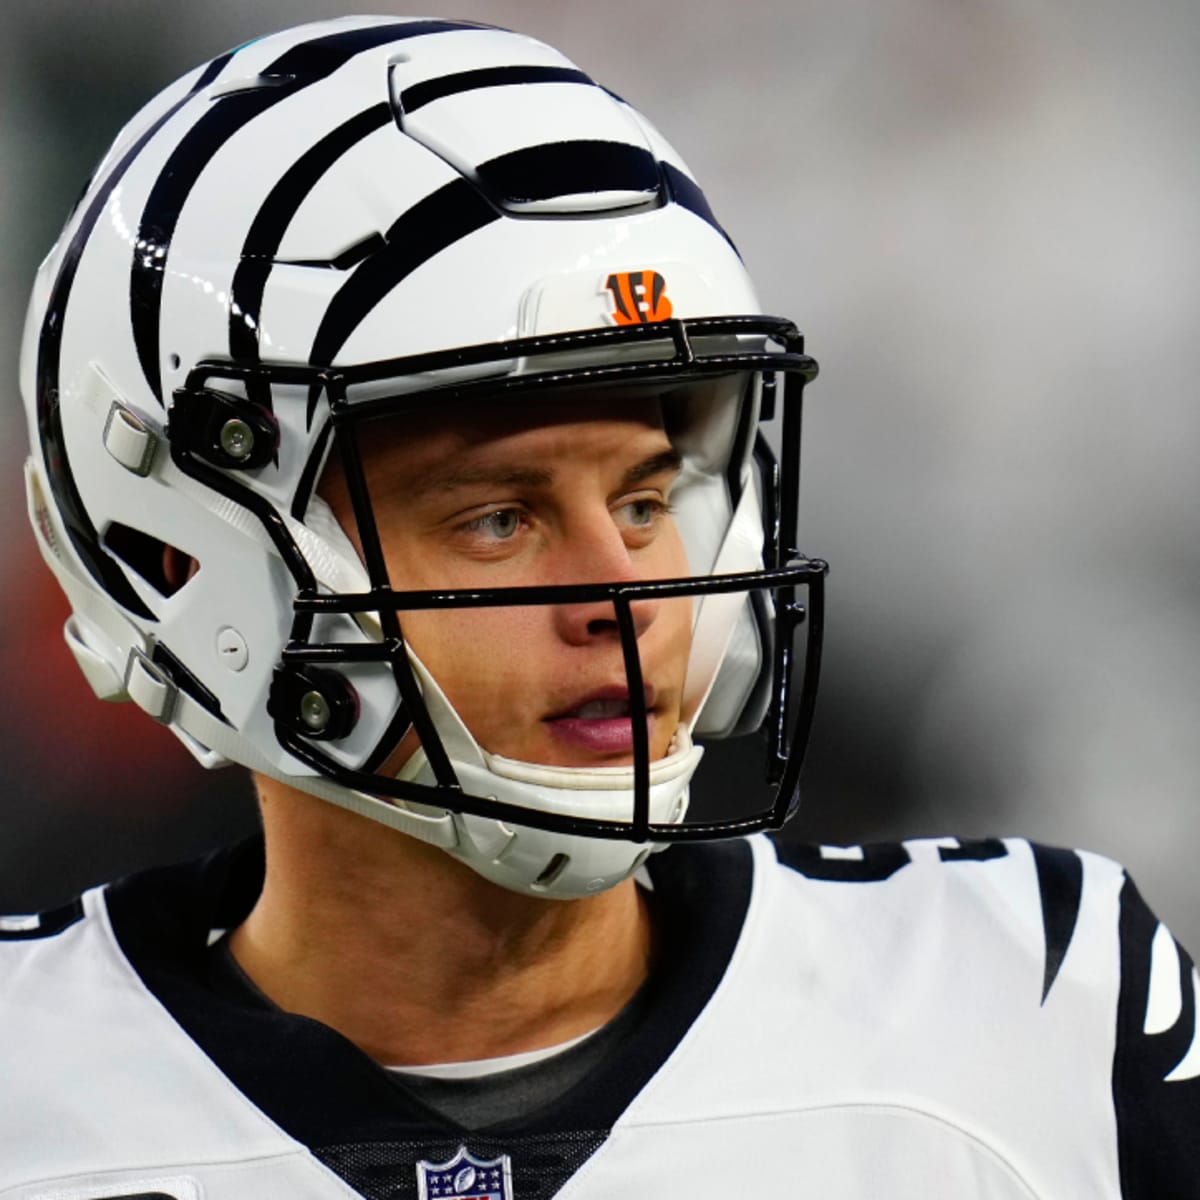 Bengals will wear black jerseys and white pants in Wild Card game